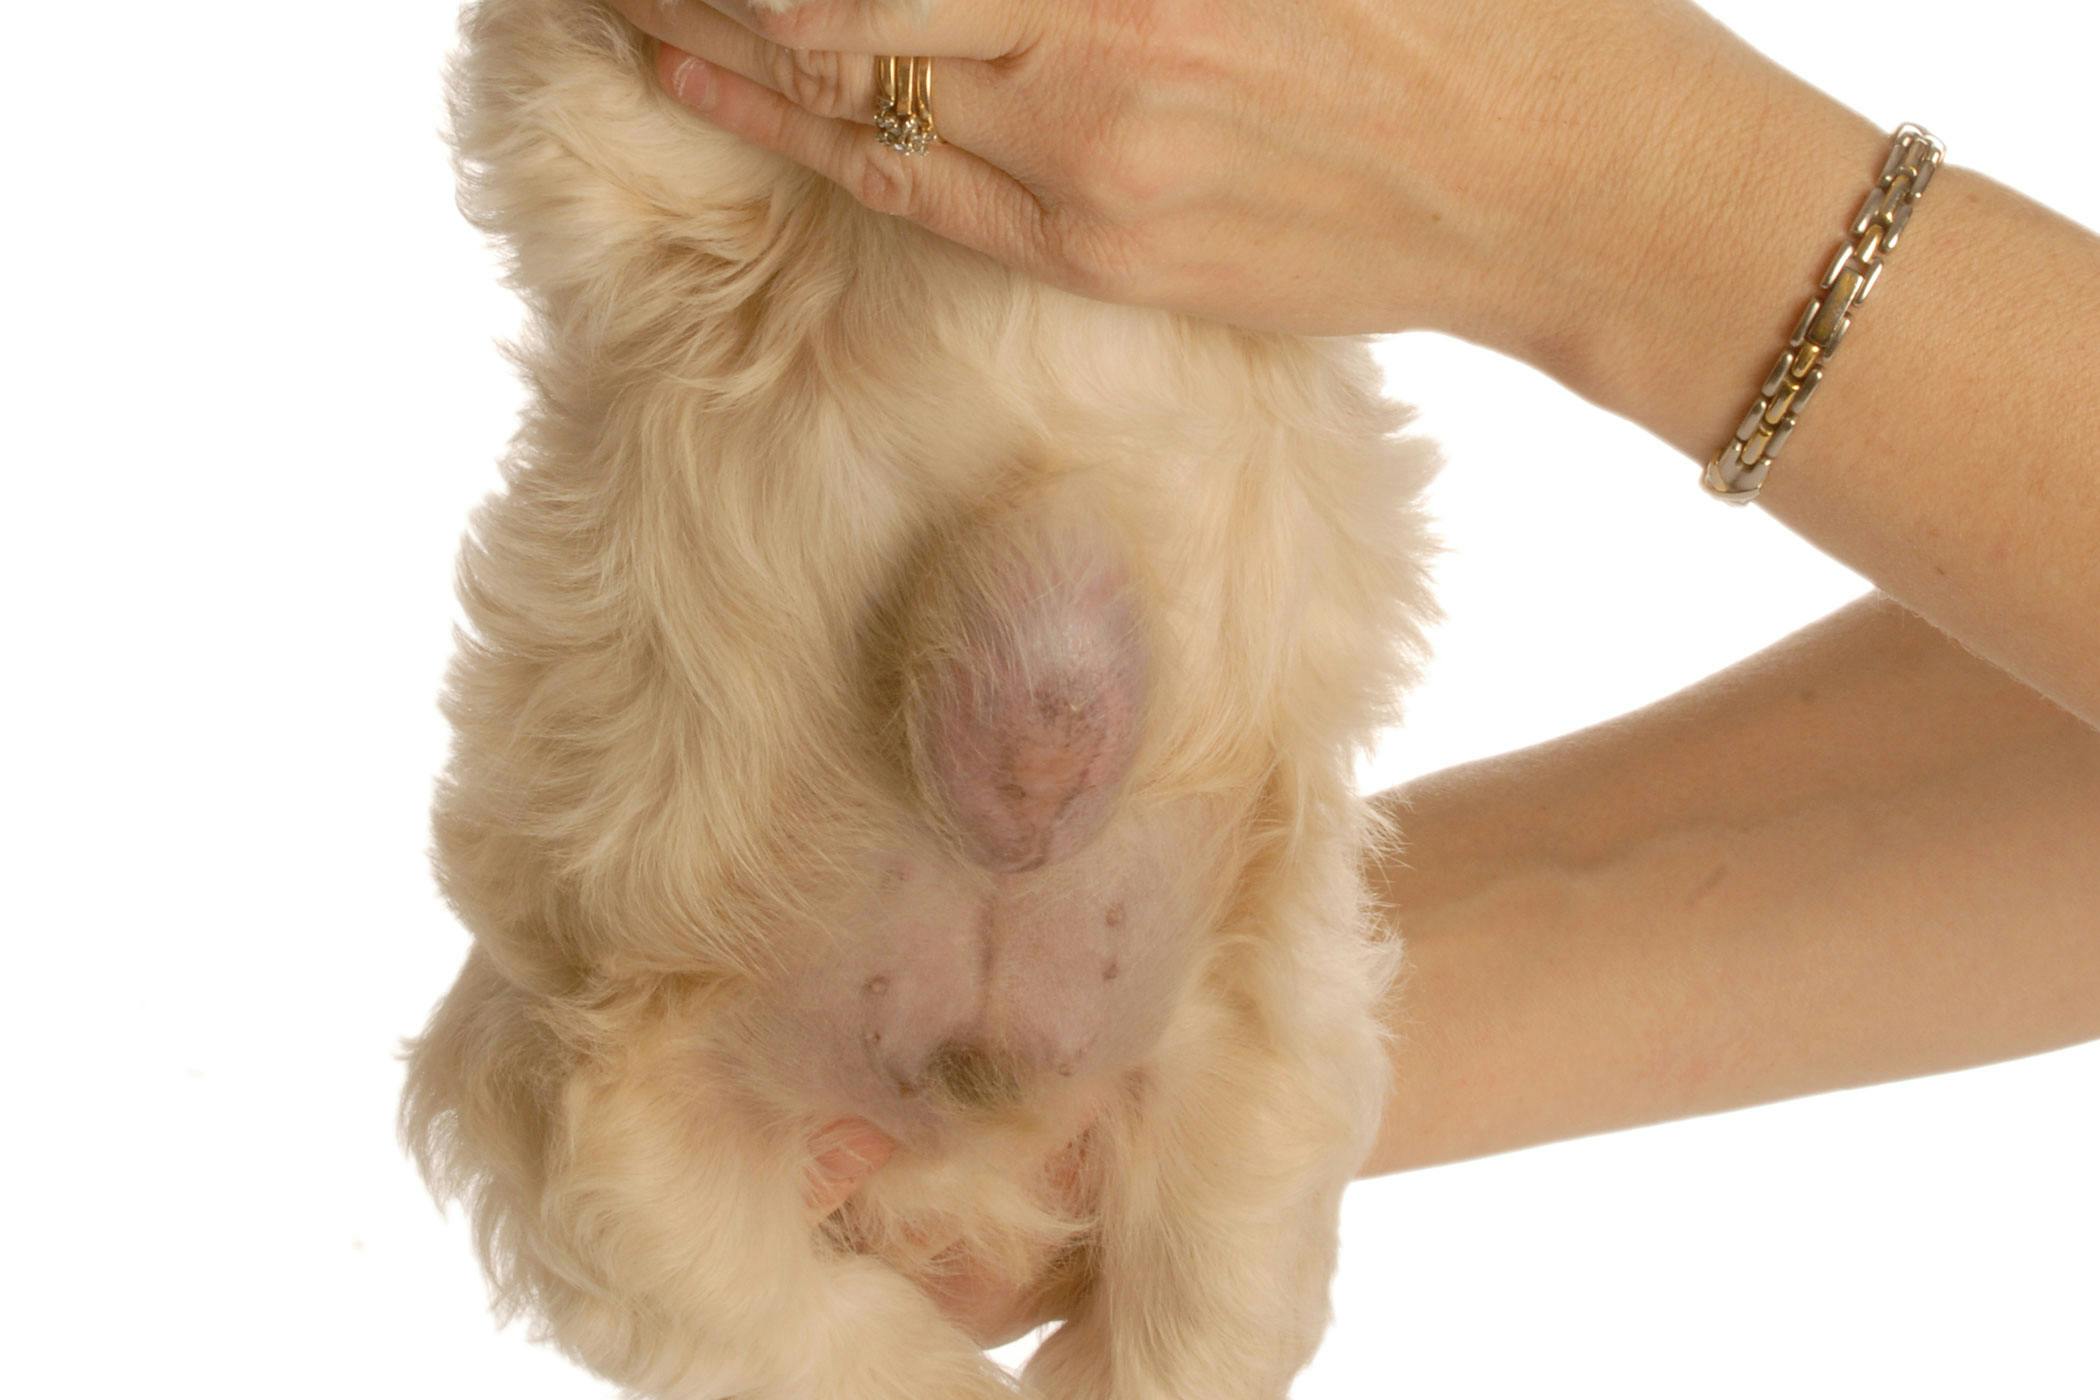 how can i tell if my dog has a hernia